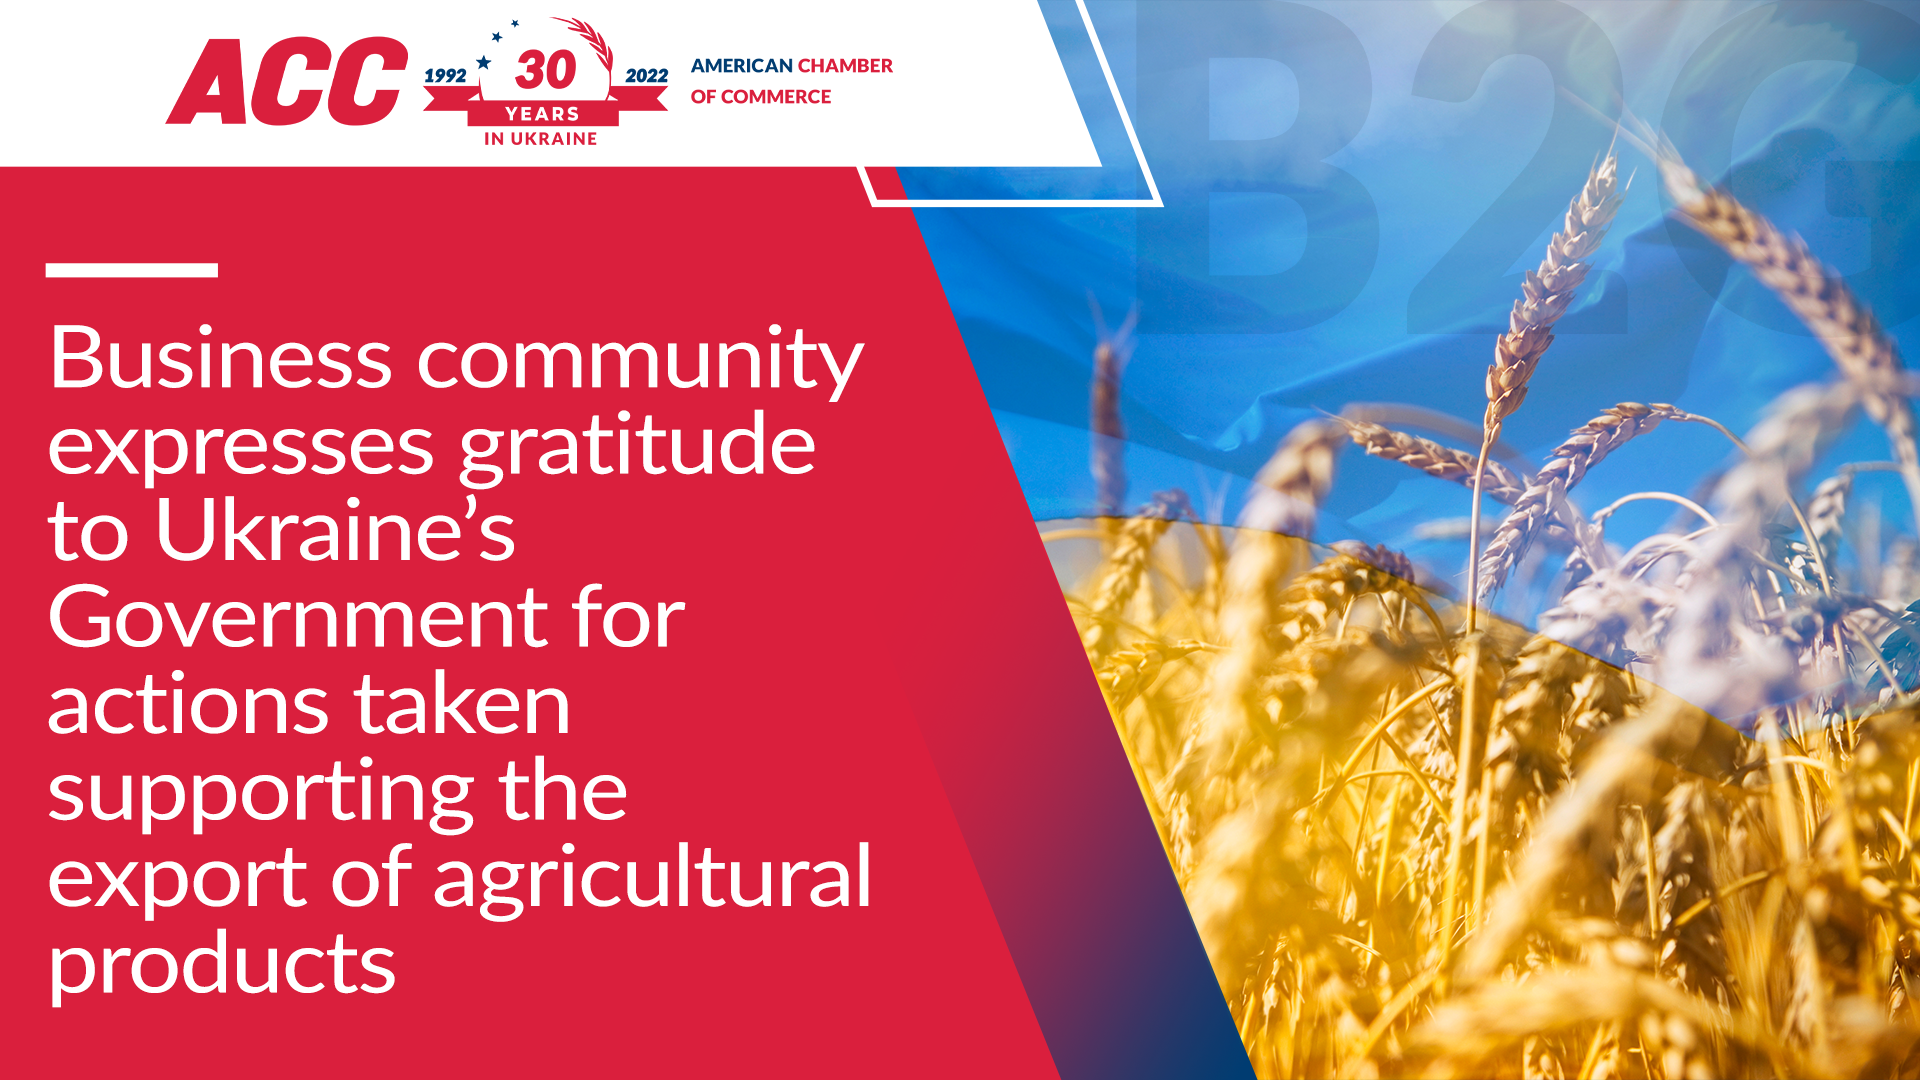 Business community expresses gratitude to Ukraine’s Government for actions taken supporting the export of agricultural products